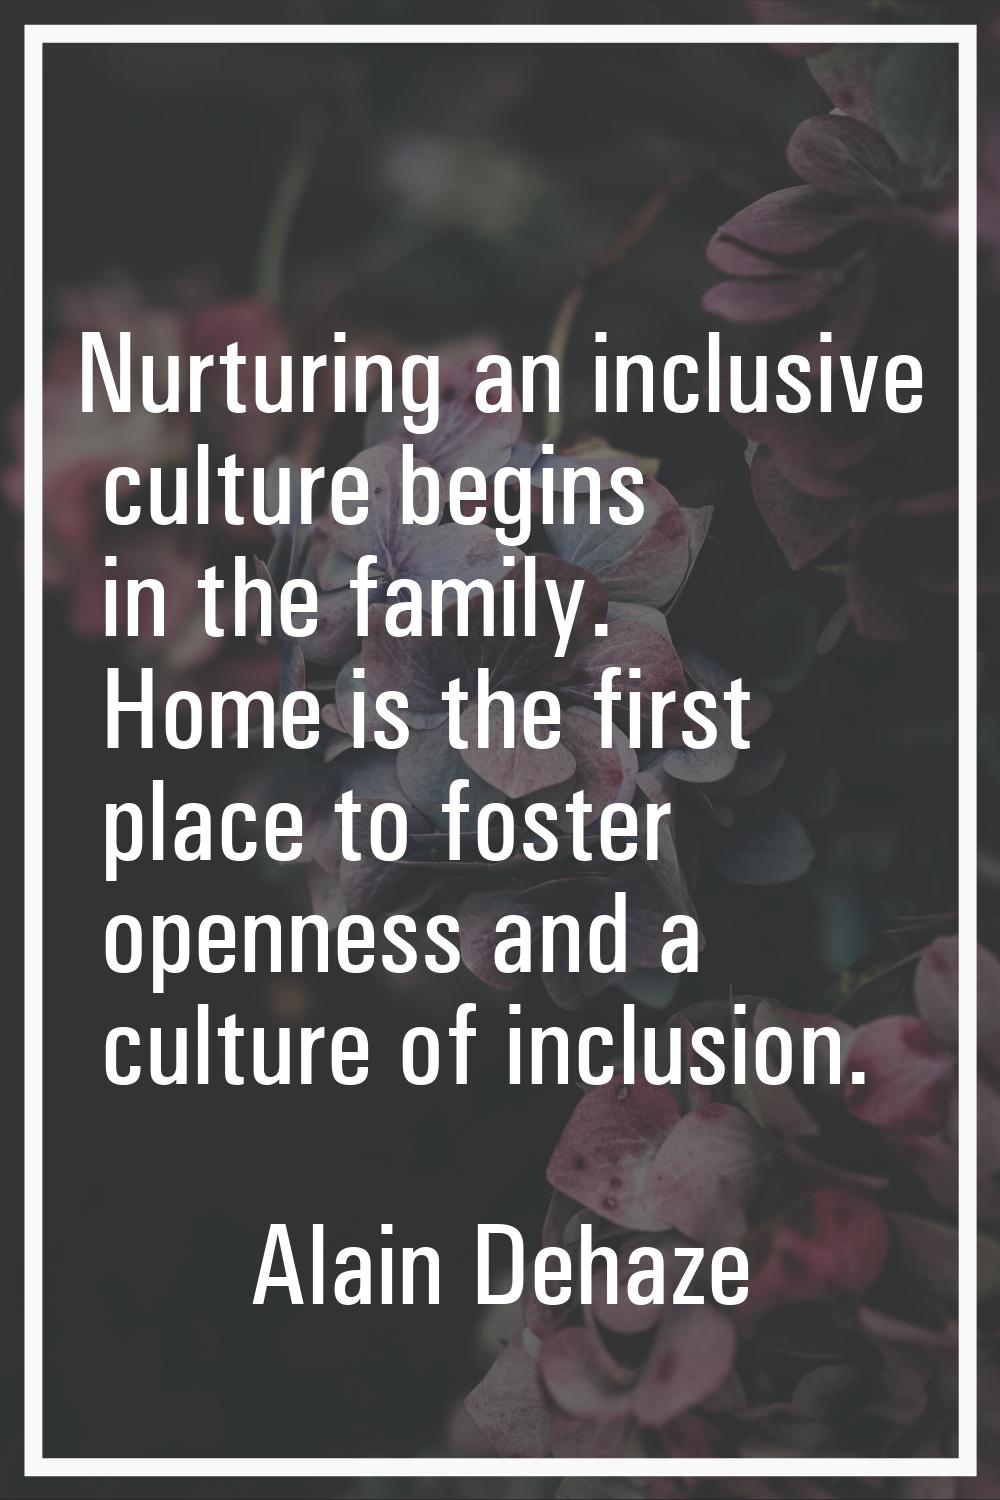 Nurturing an inclusive culture begins in the family. Home is the first place to foster openness and